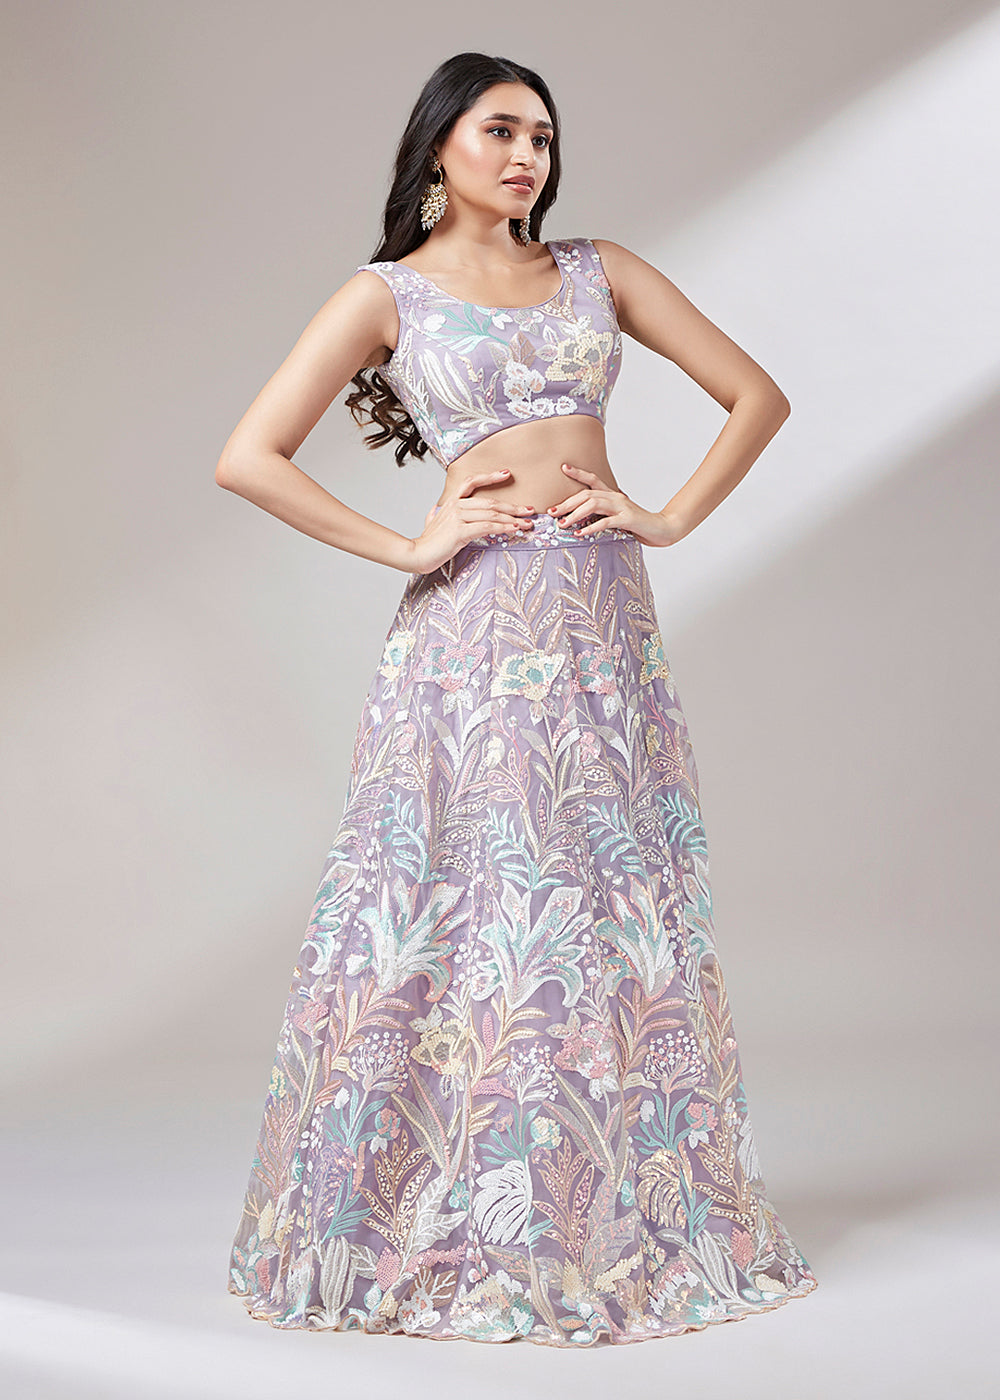 Buy Now Mauve Sequinned Embroidered Bridesmaid Lehenga Choli Online in USA, UK, Canada & Worldwide at Empress Clothing.